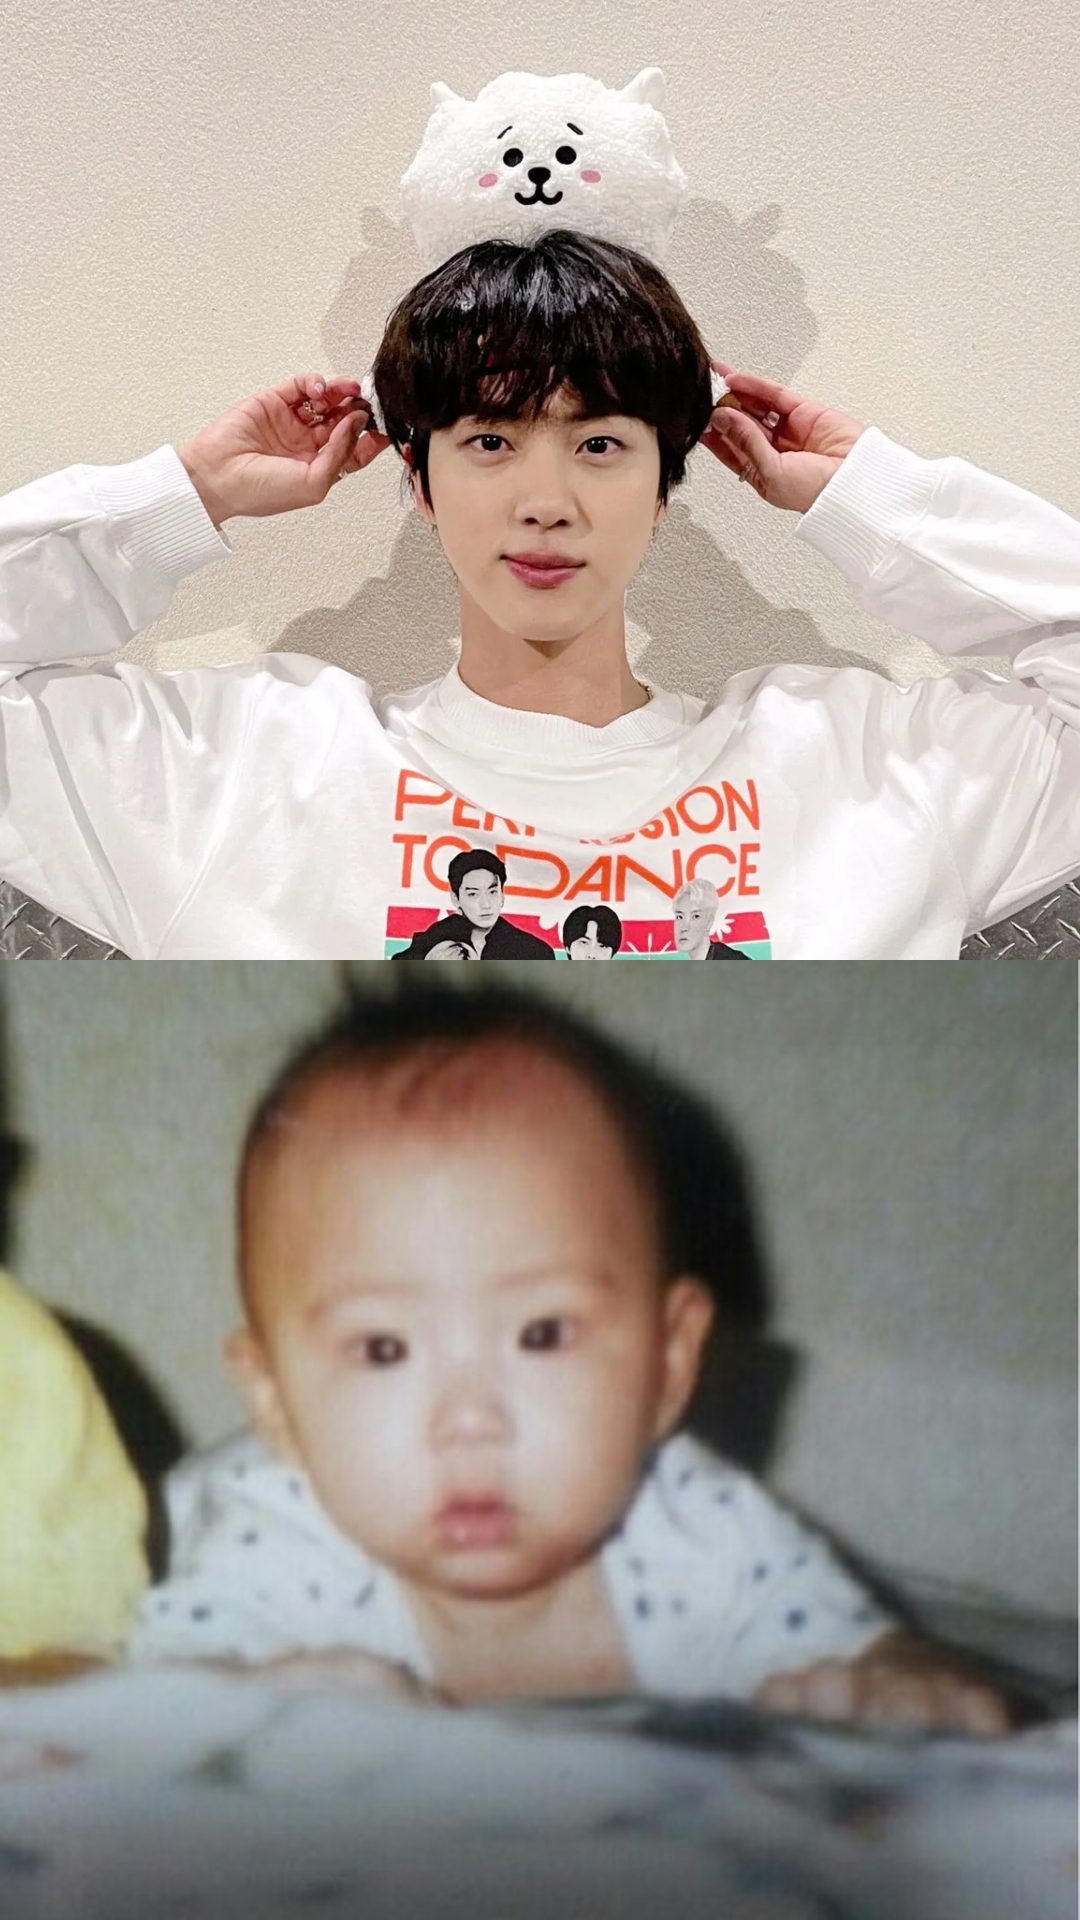 BTS Jin aka Kim Seokjin has always been adorable and these childhood photos are proof